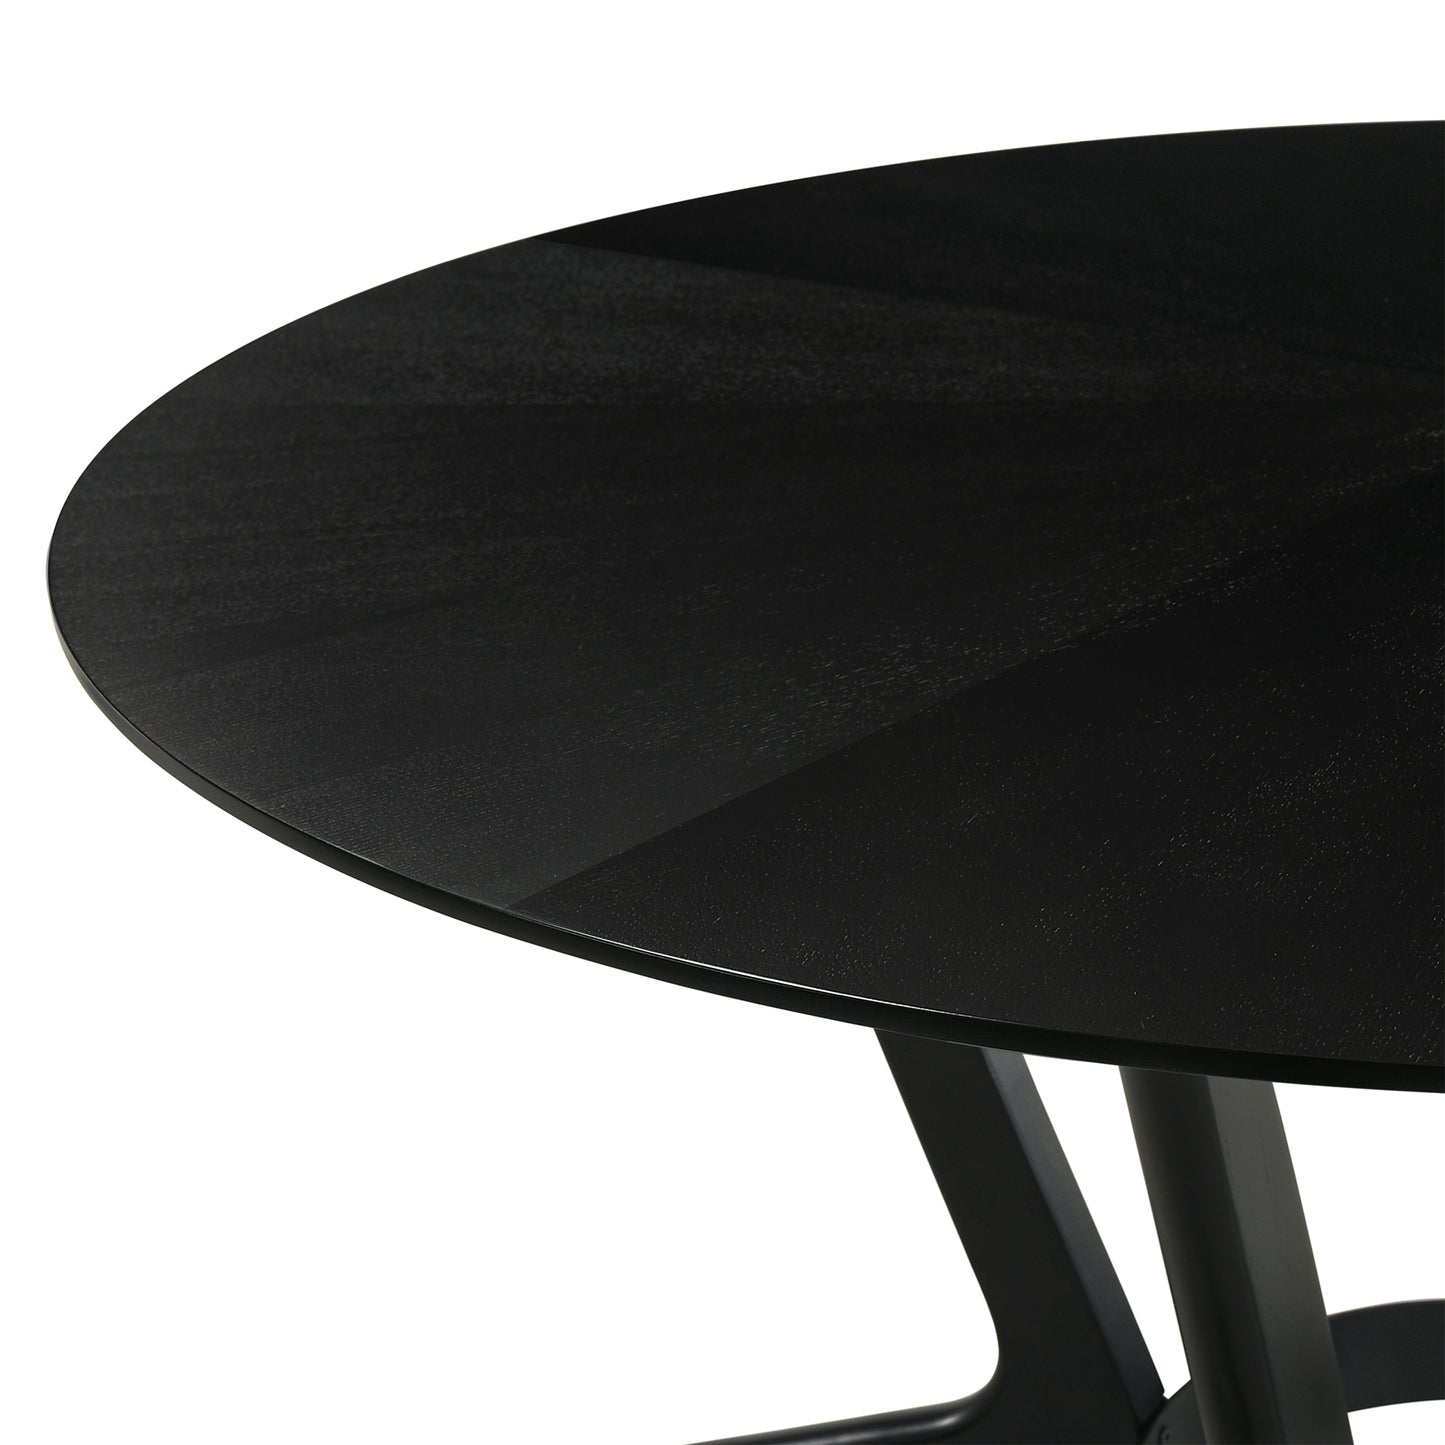 Santana 5 Piece Round Black Wood Dining Table Set with Charcoal Fabric